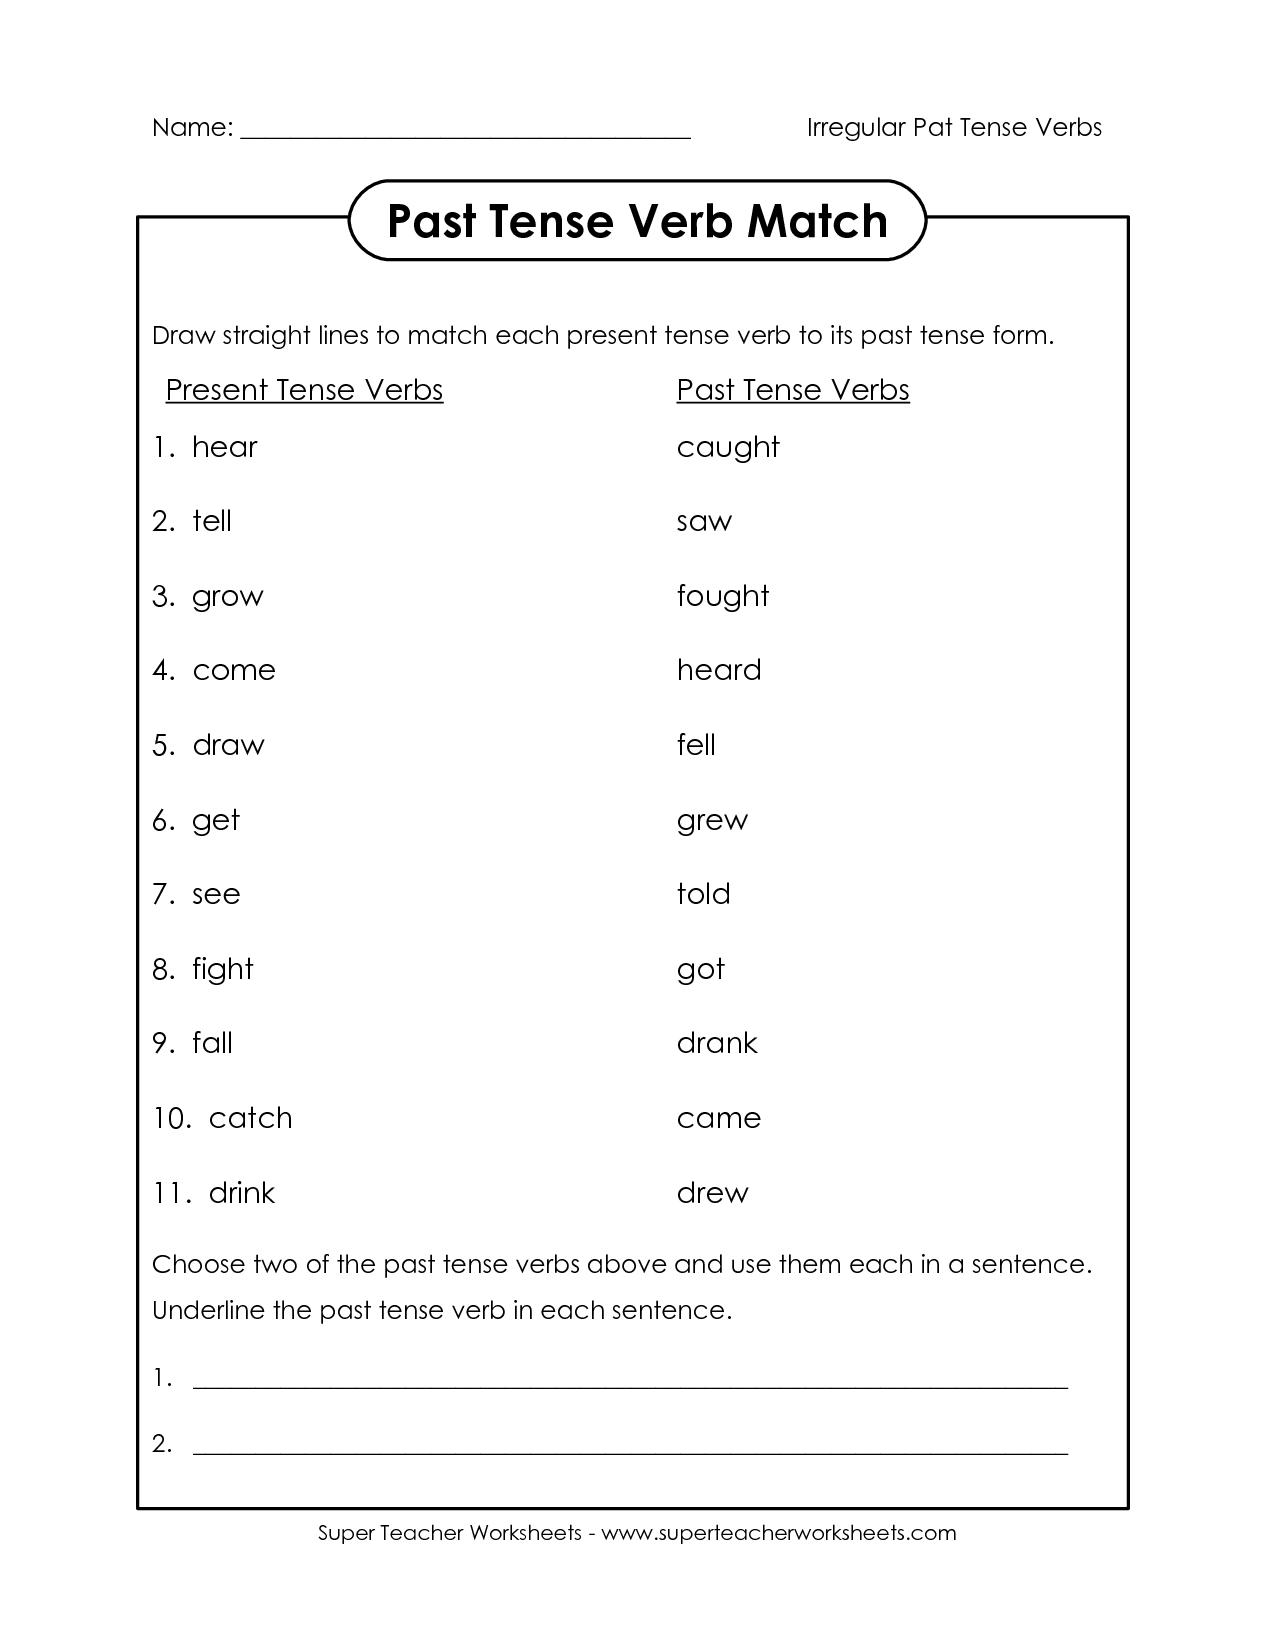 Search Results For 2nd Grade Past Tense Verbs Worksheets Calendar 2015